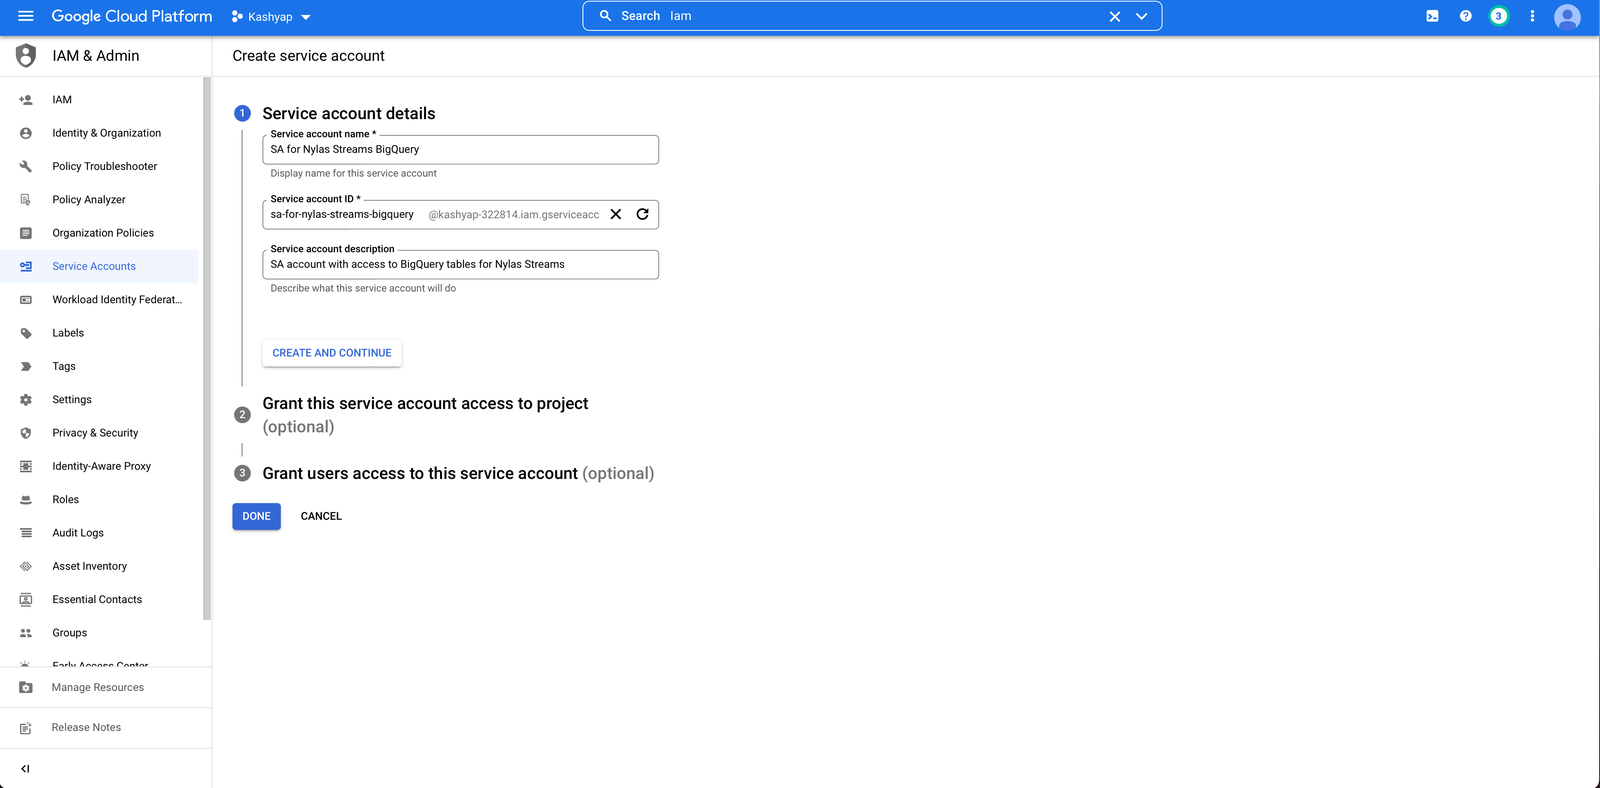 Google console showing the Create service account page